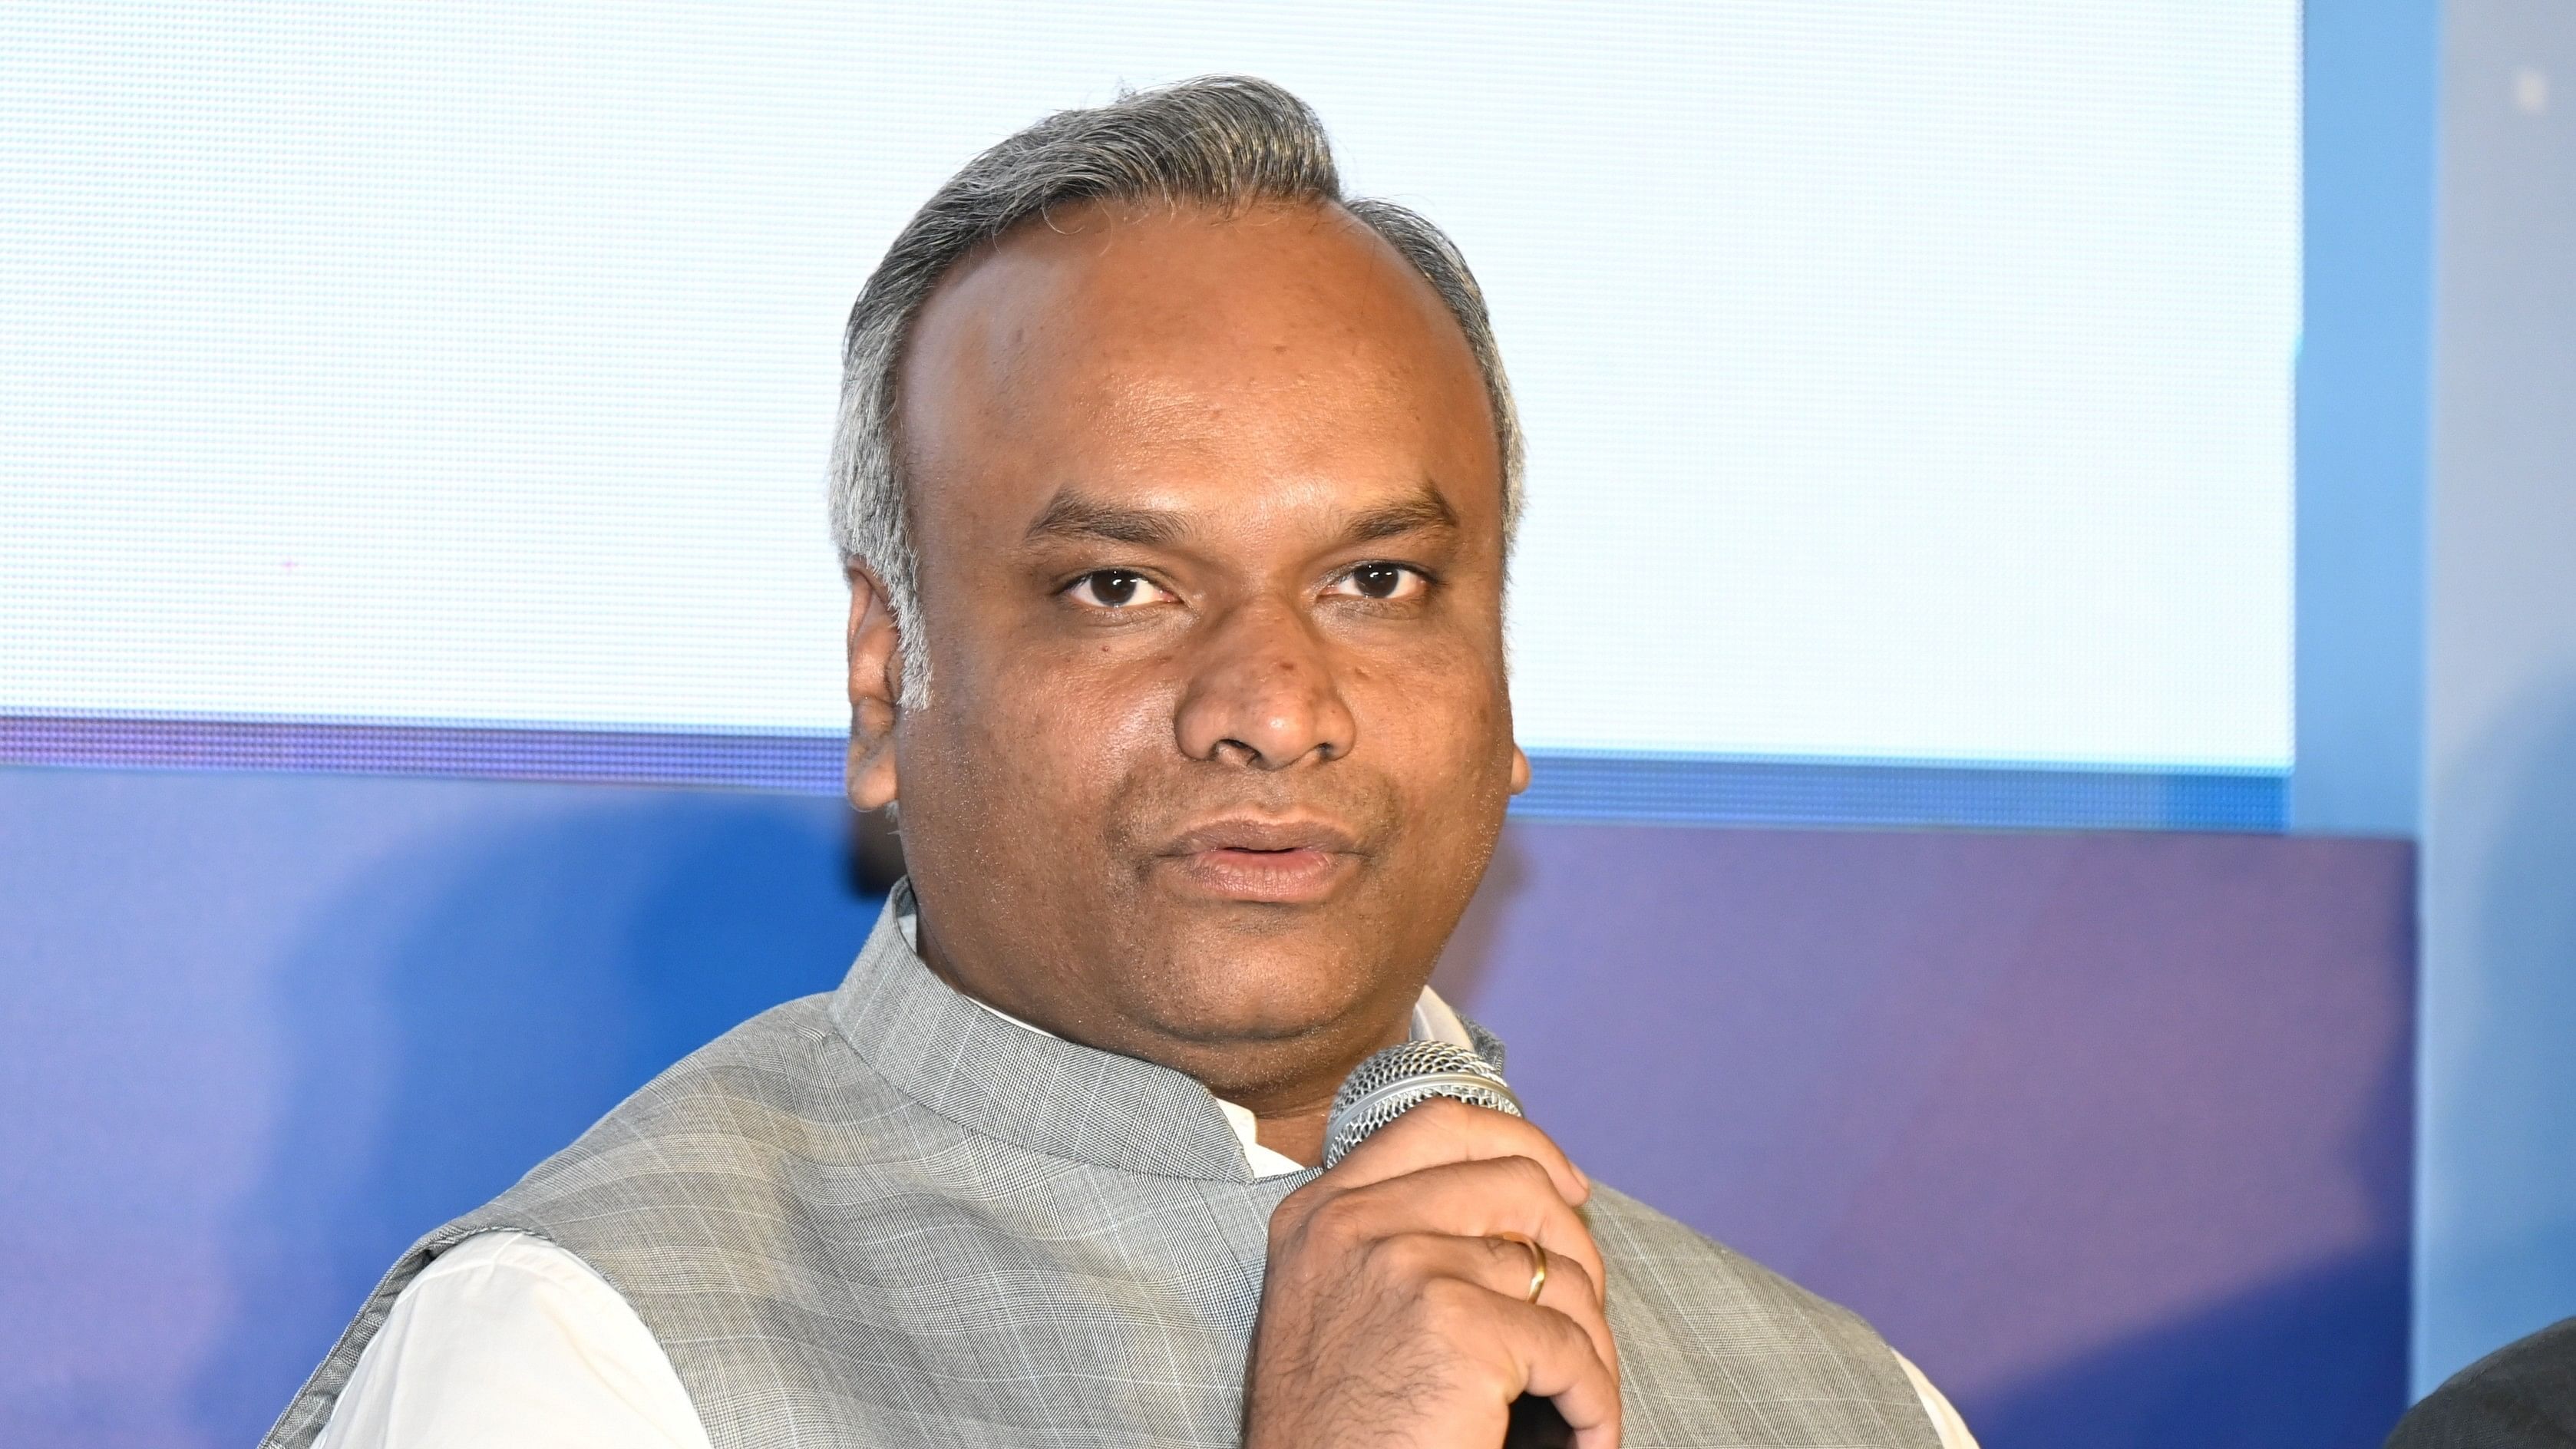 <div class="paragraphs"><p>Priyank Kharge said he has also spoken to Congress President Mallikarjun Kharge last night and requested him to bring it to the notice of External Affairs Minister S Jaishankar.</p></div>